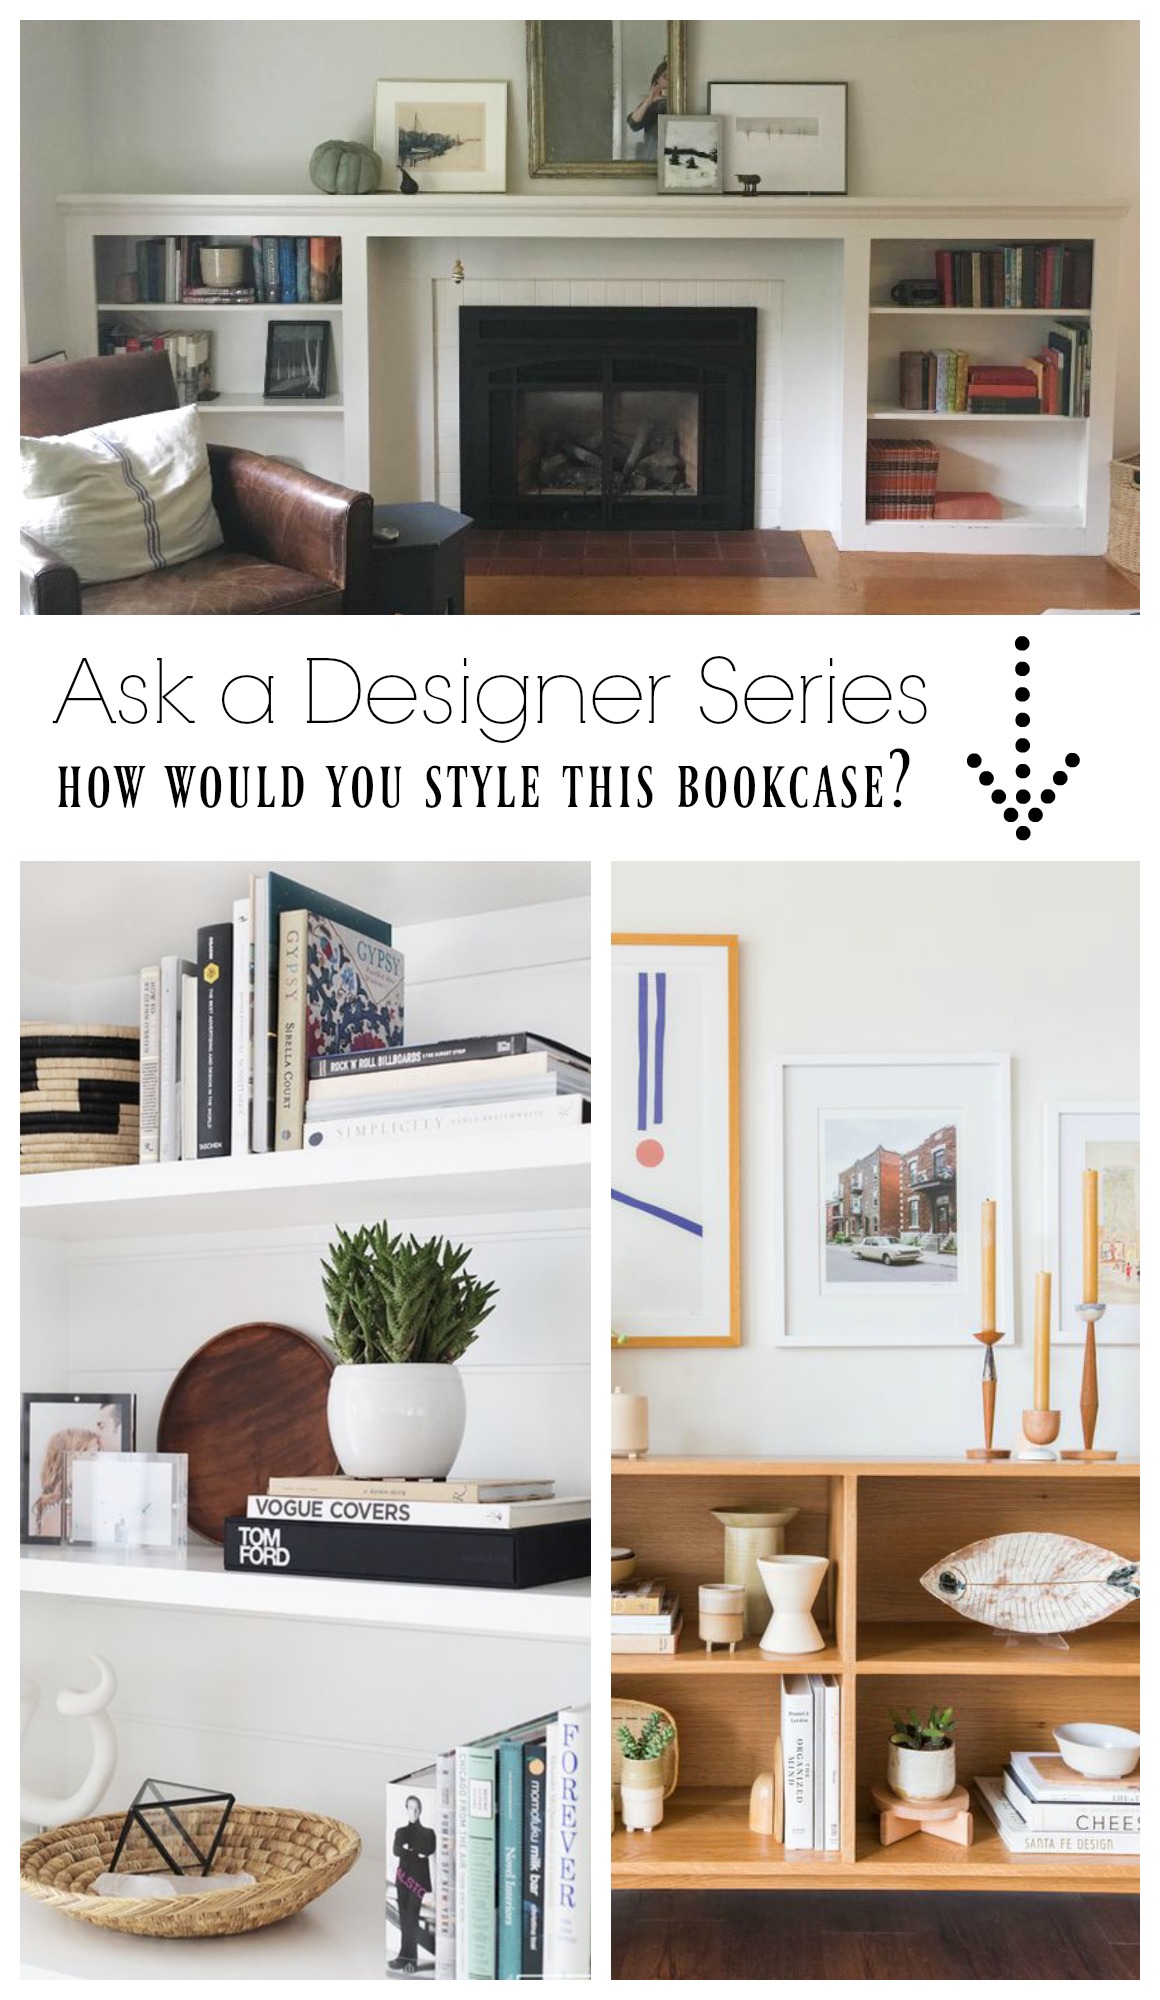 Ask a Designer Series- Bookcase Styling